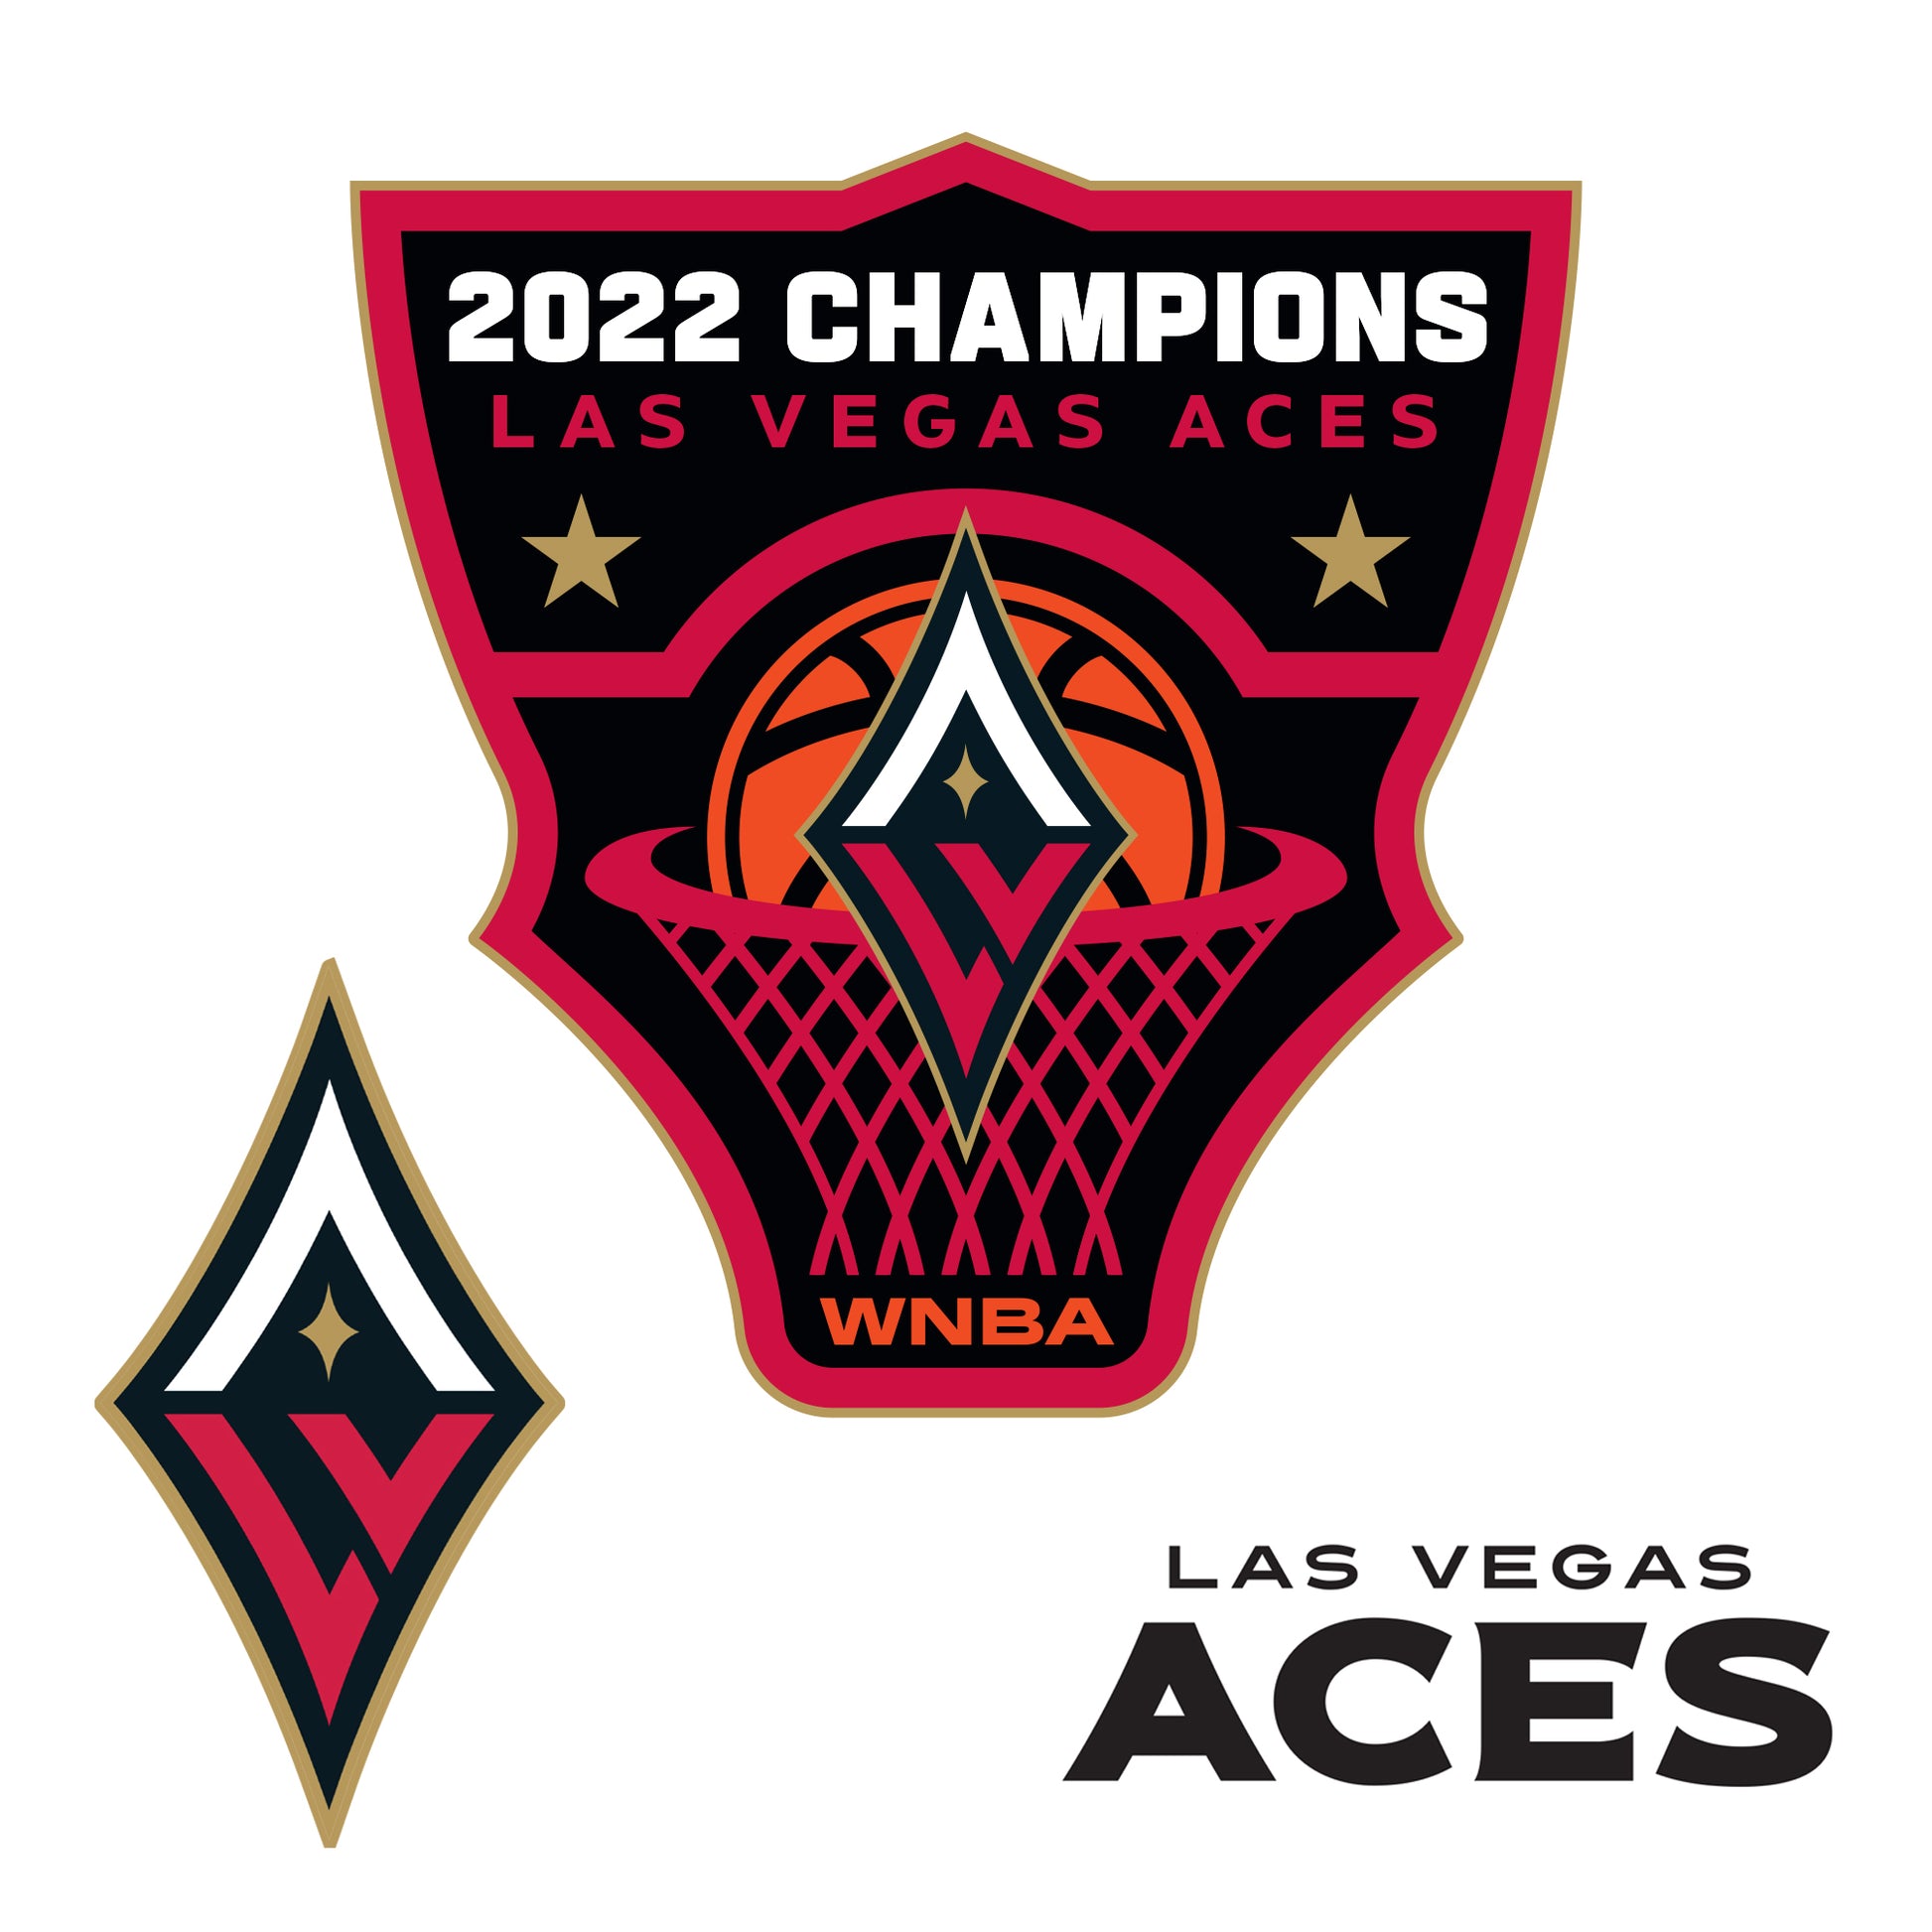 Las Vegas Aces: 2022 Champions Logo - Officially Licensed WNBA